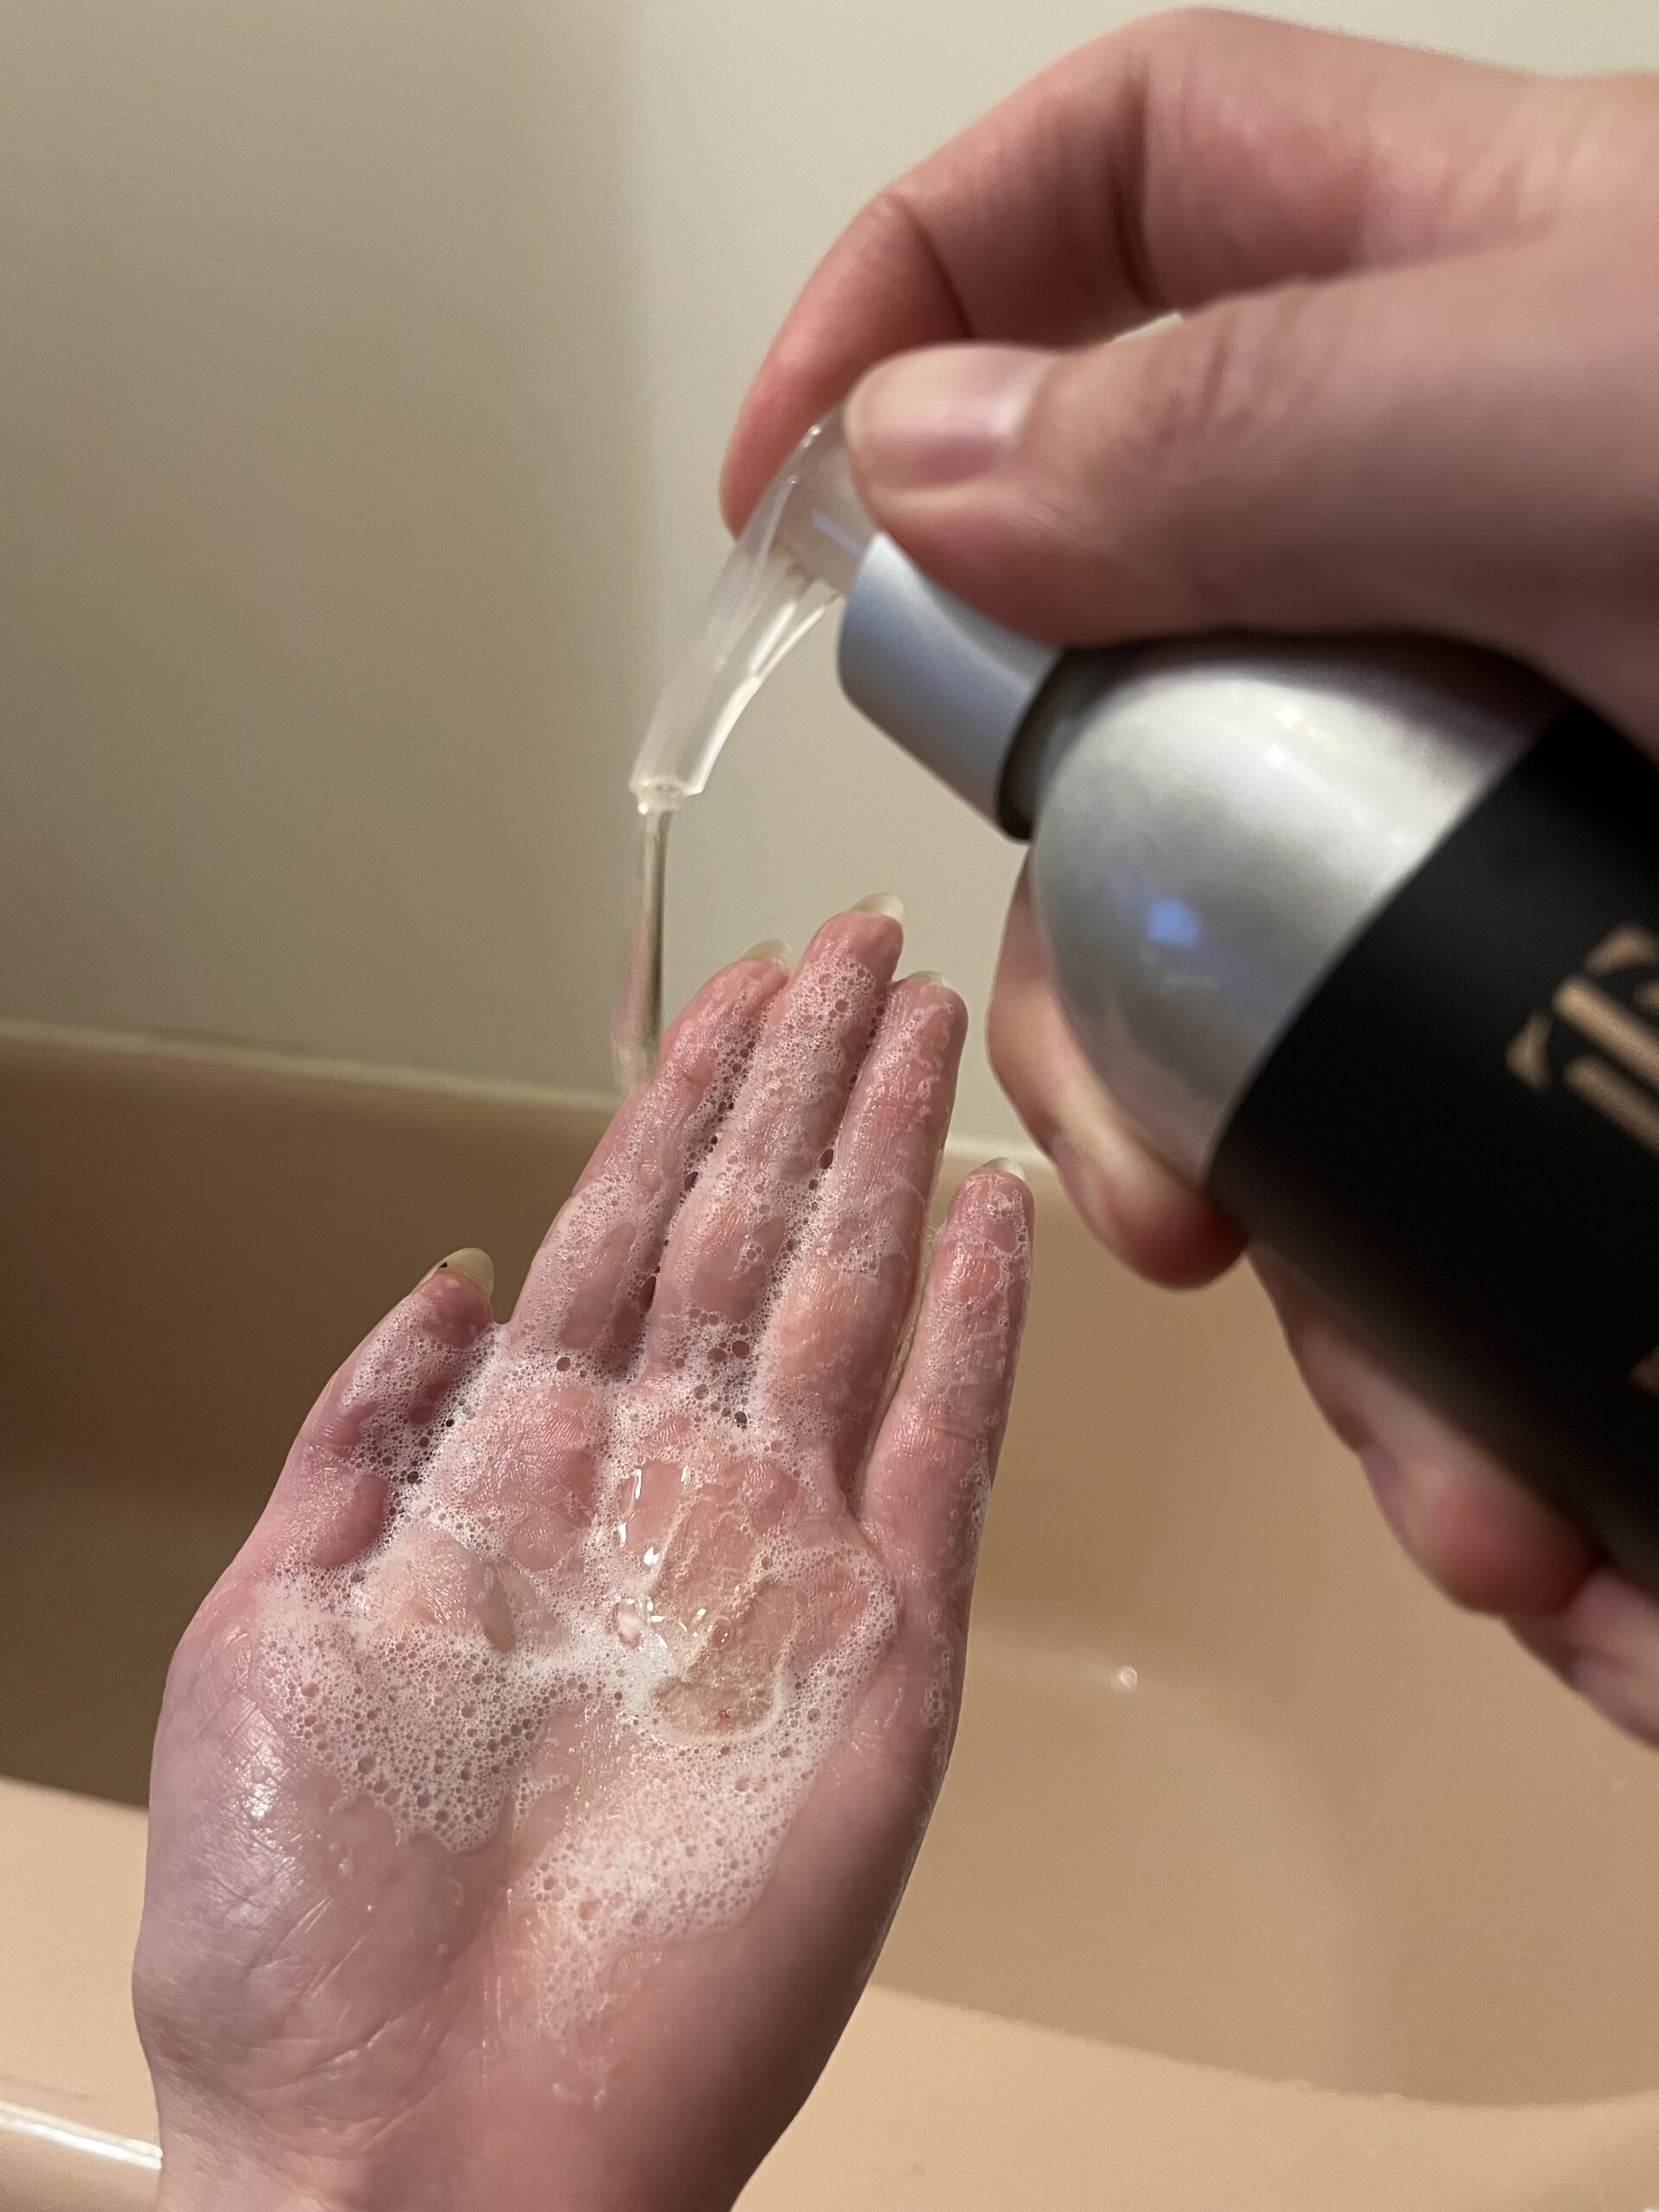 Dispensing liquid soap onto a hand above a sink.